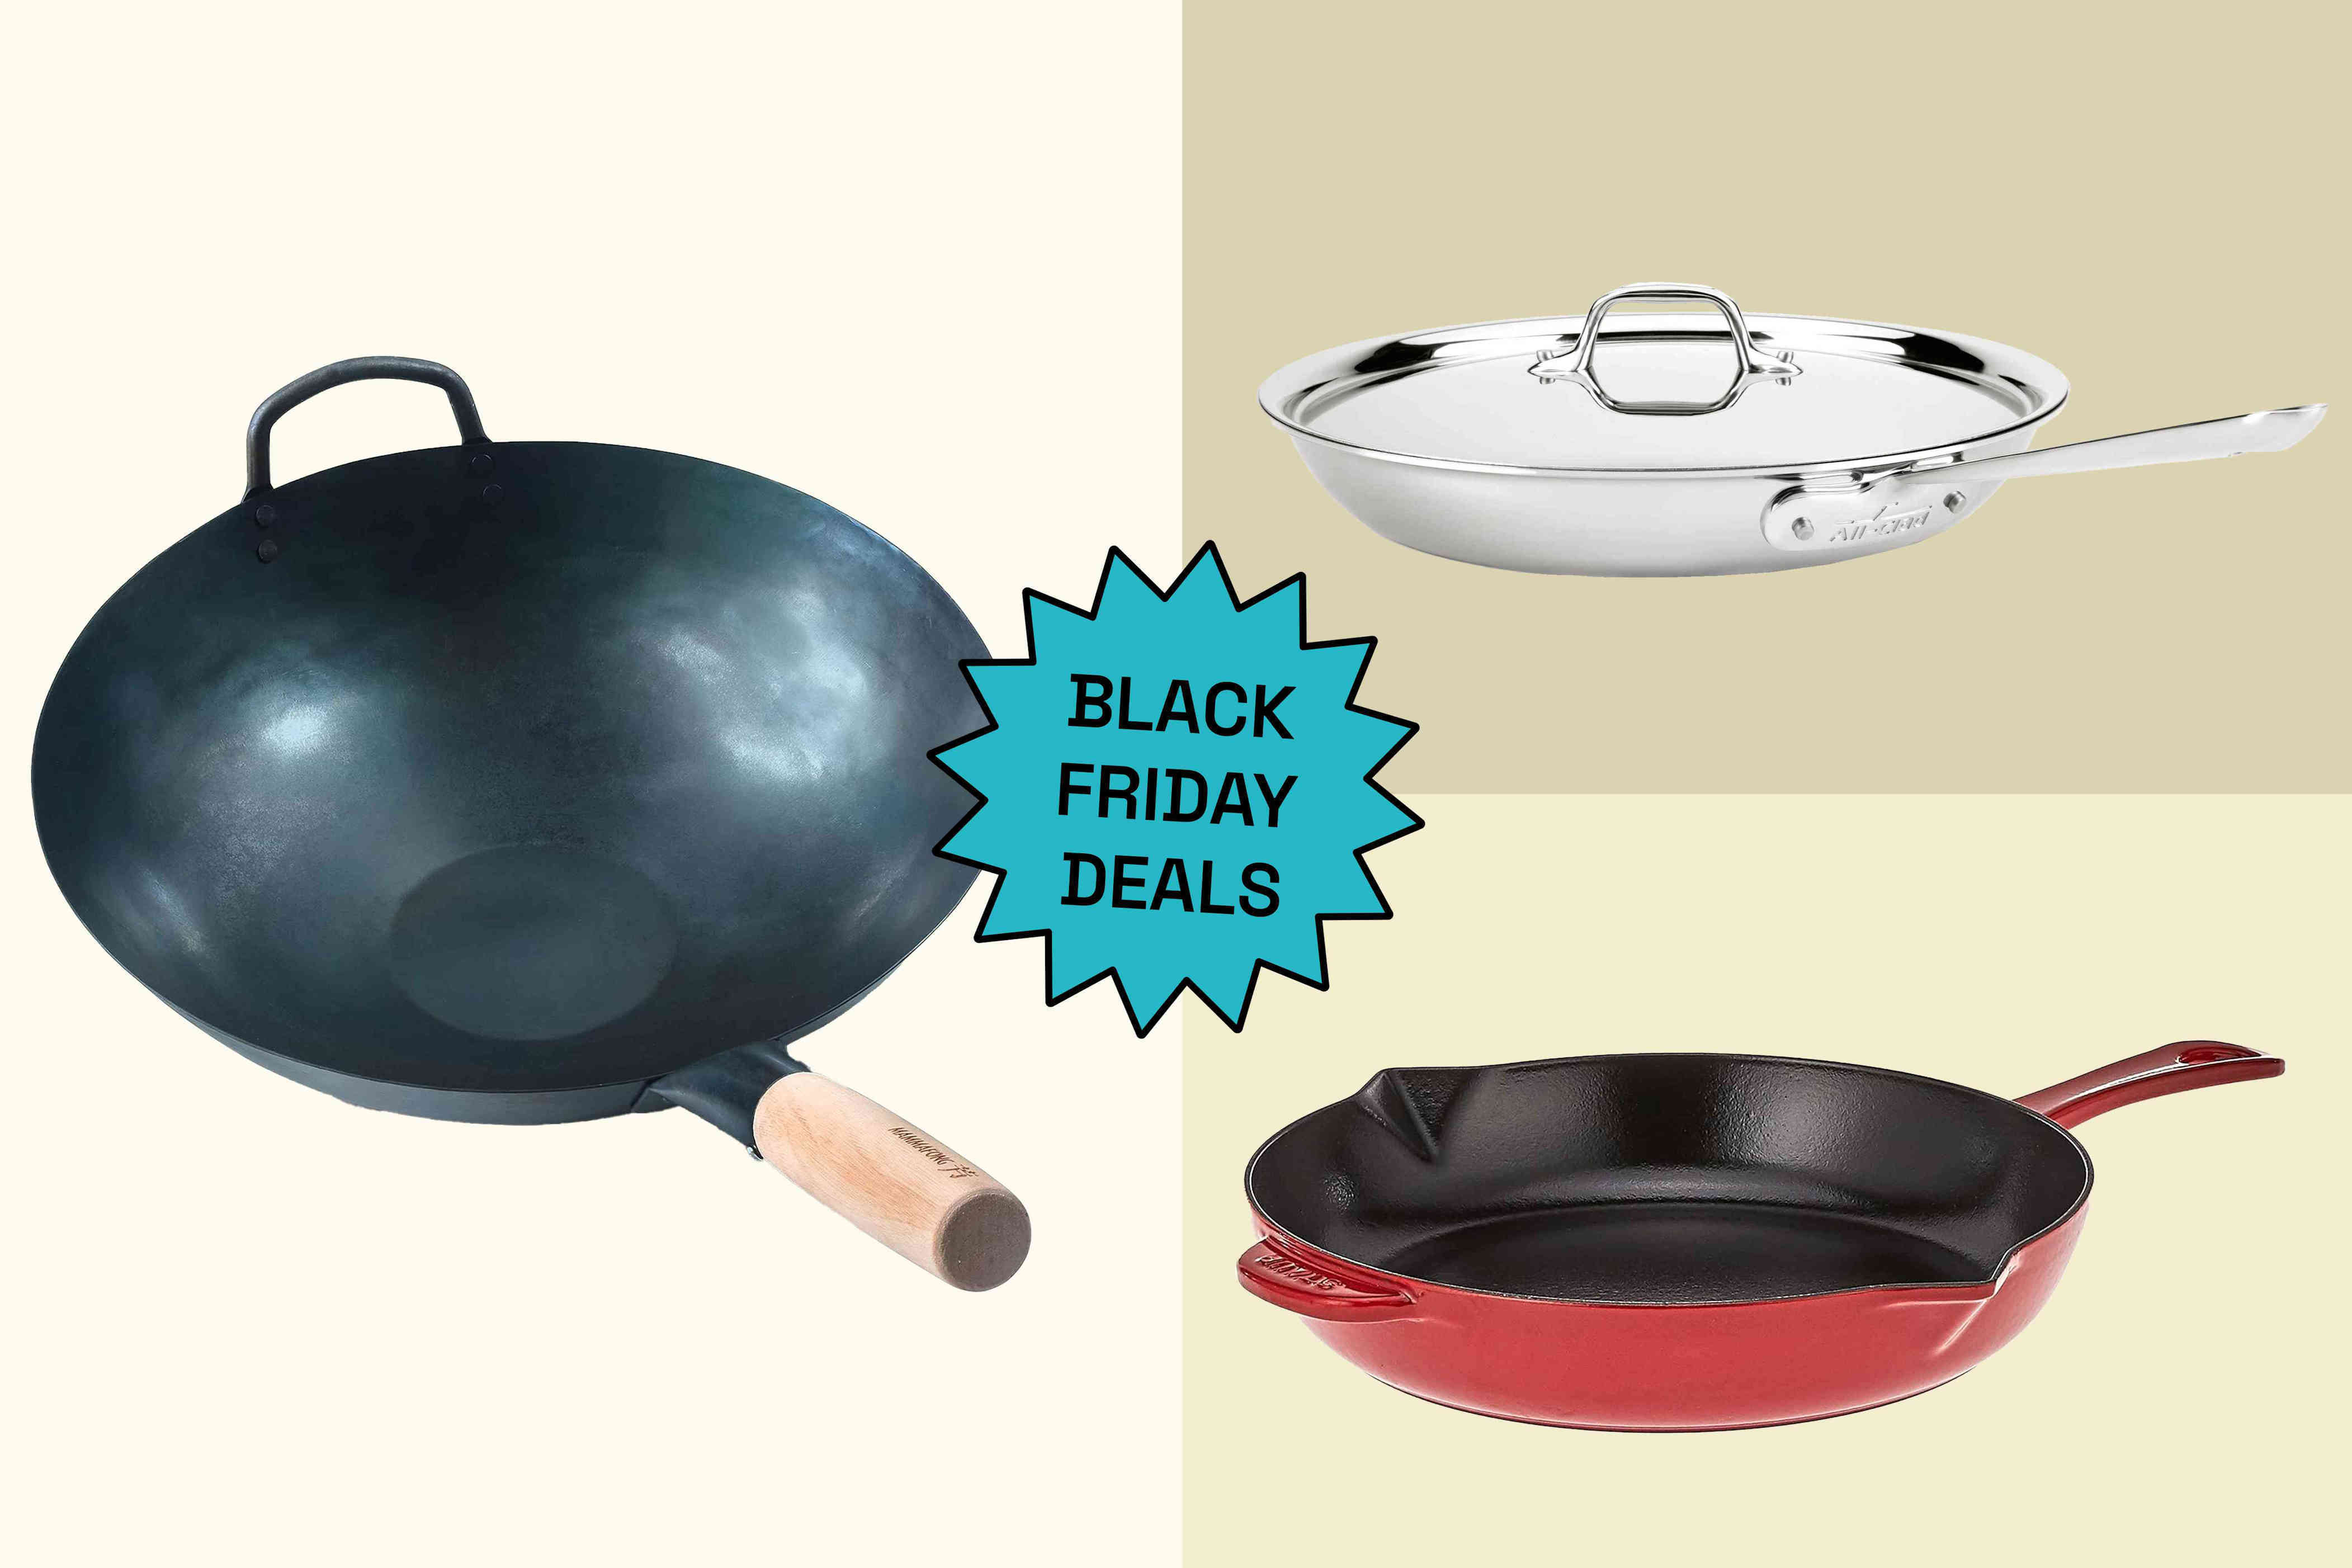 Early Cyber Monday Cookware Deals—Including Items from AllClad and Le